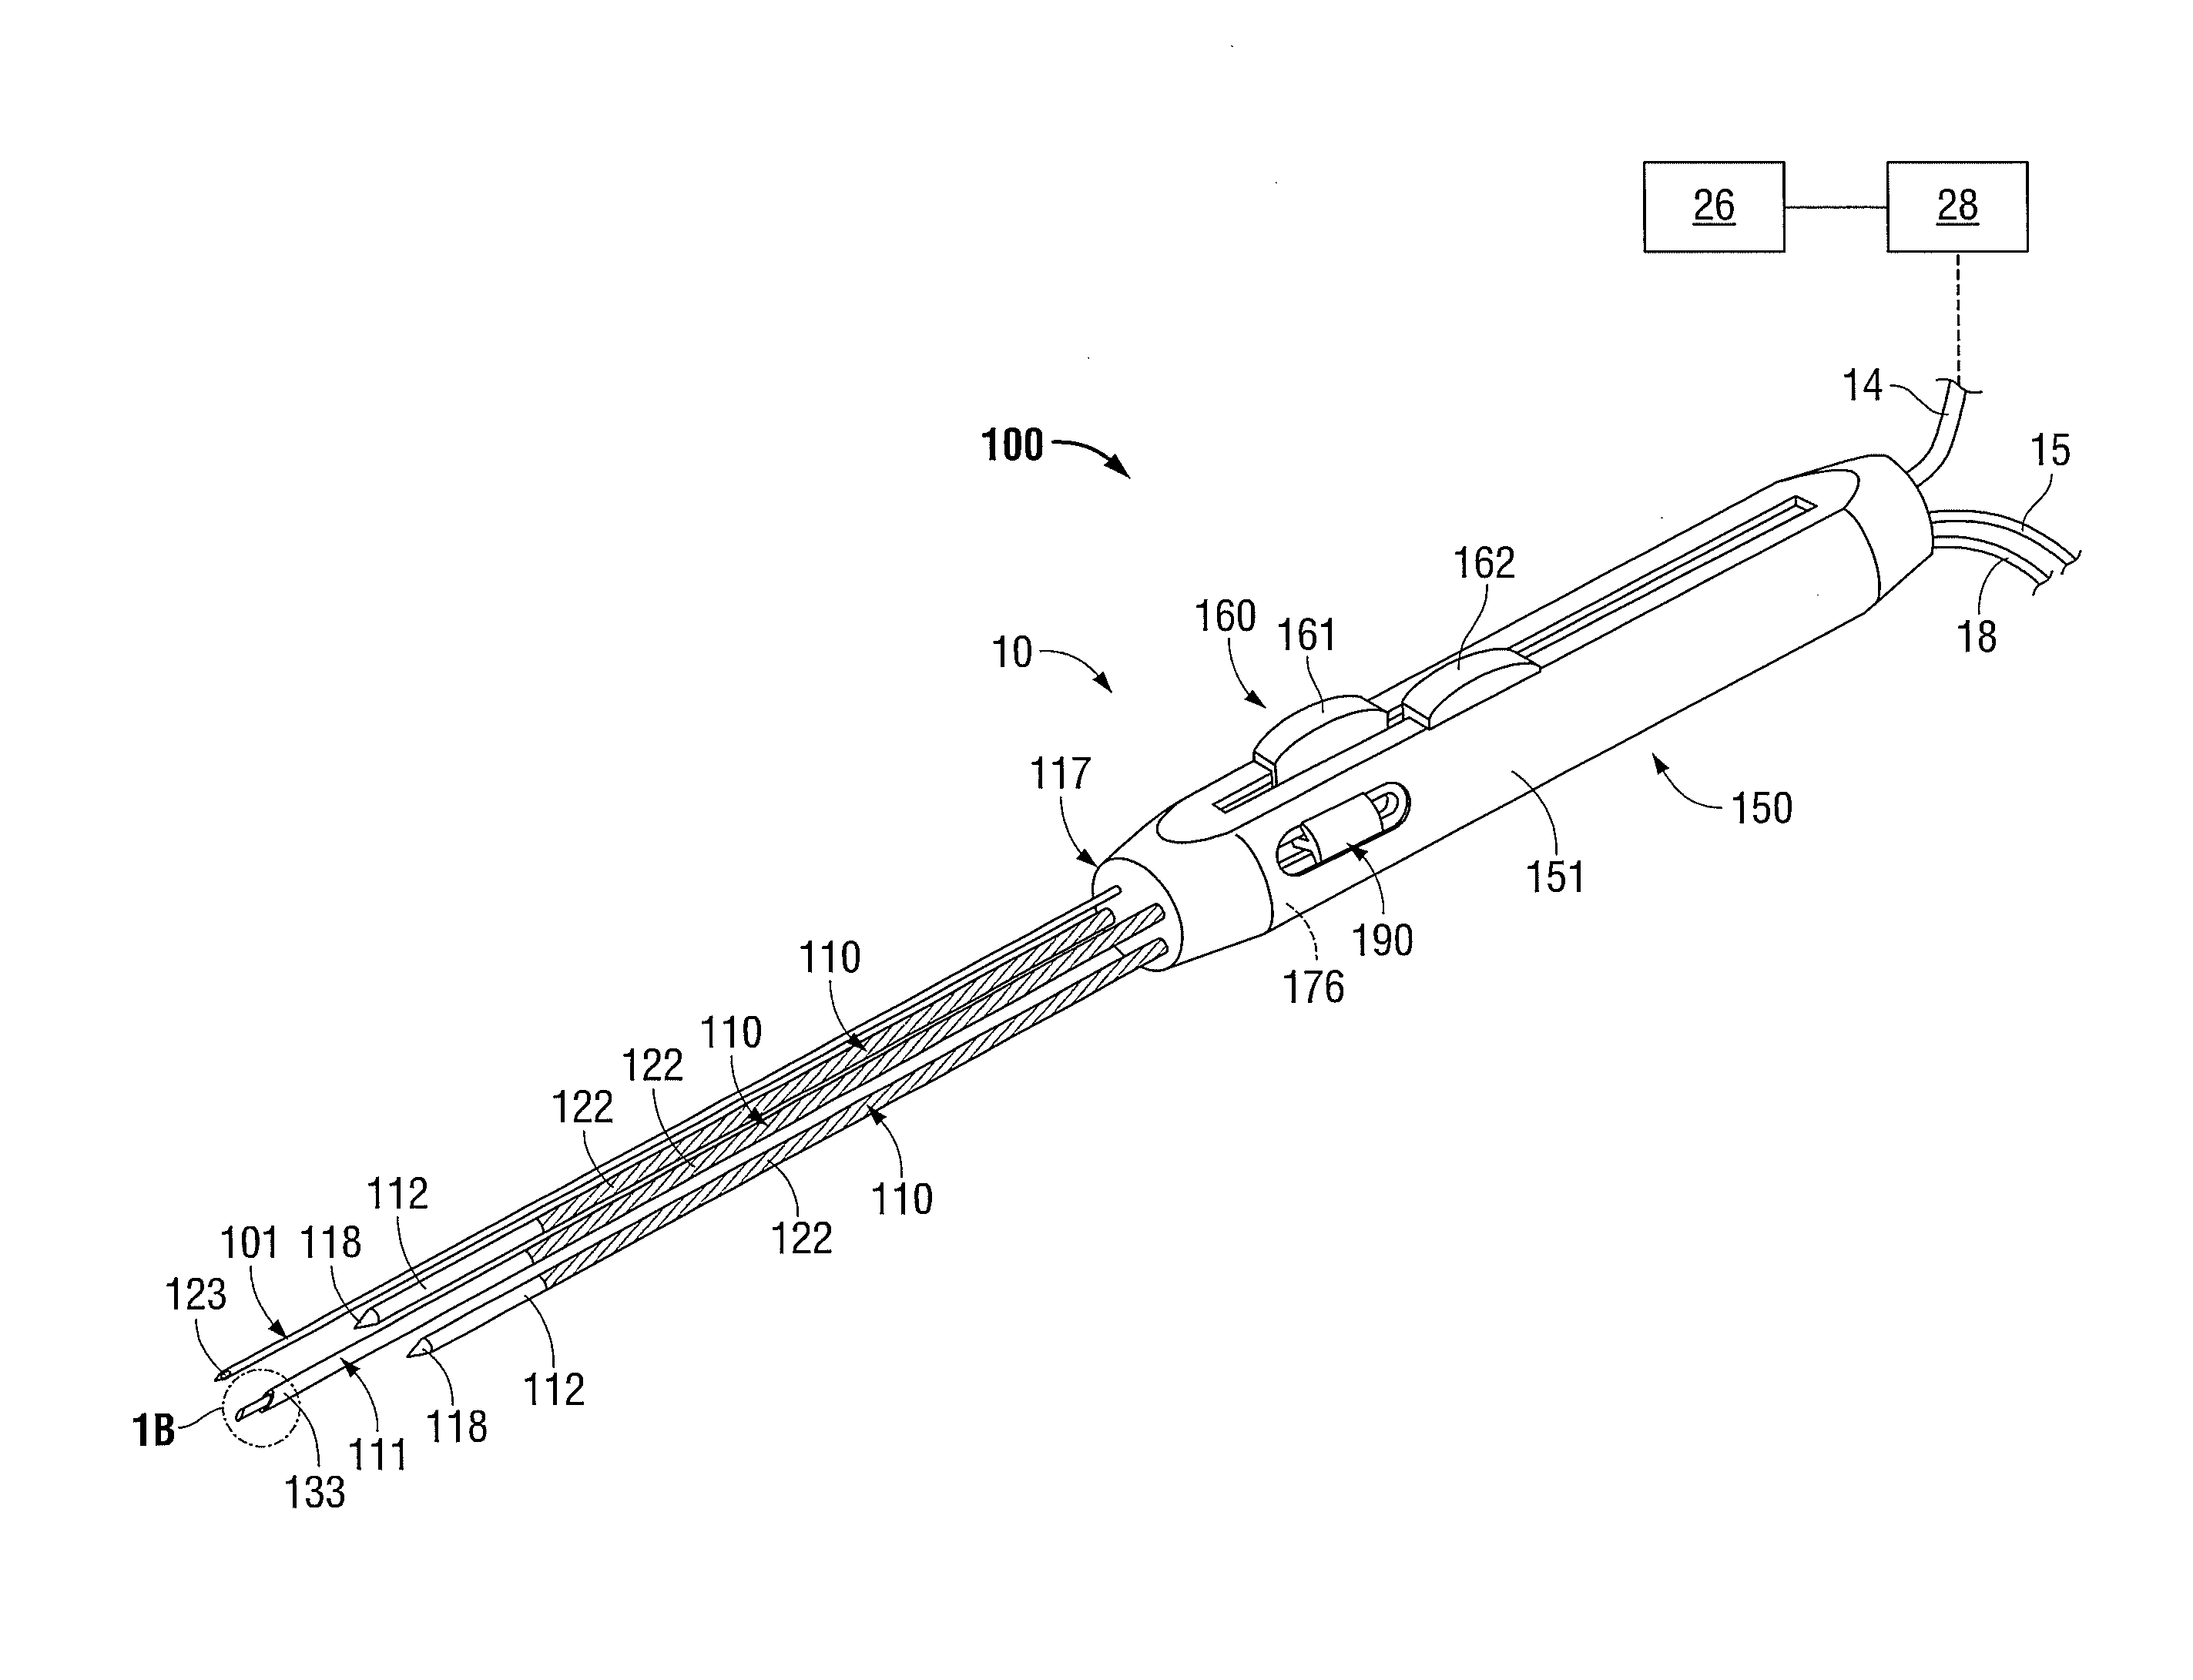 Ablation device with drug delivery component and biopsy tissue-sampling component